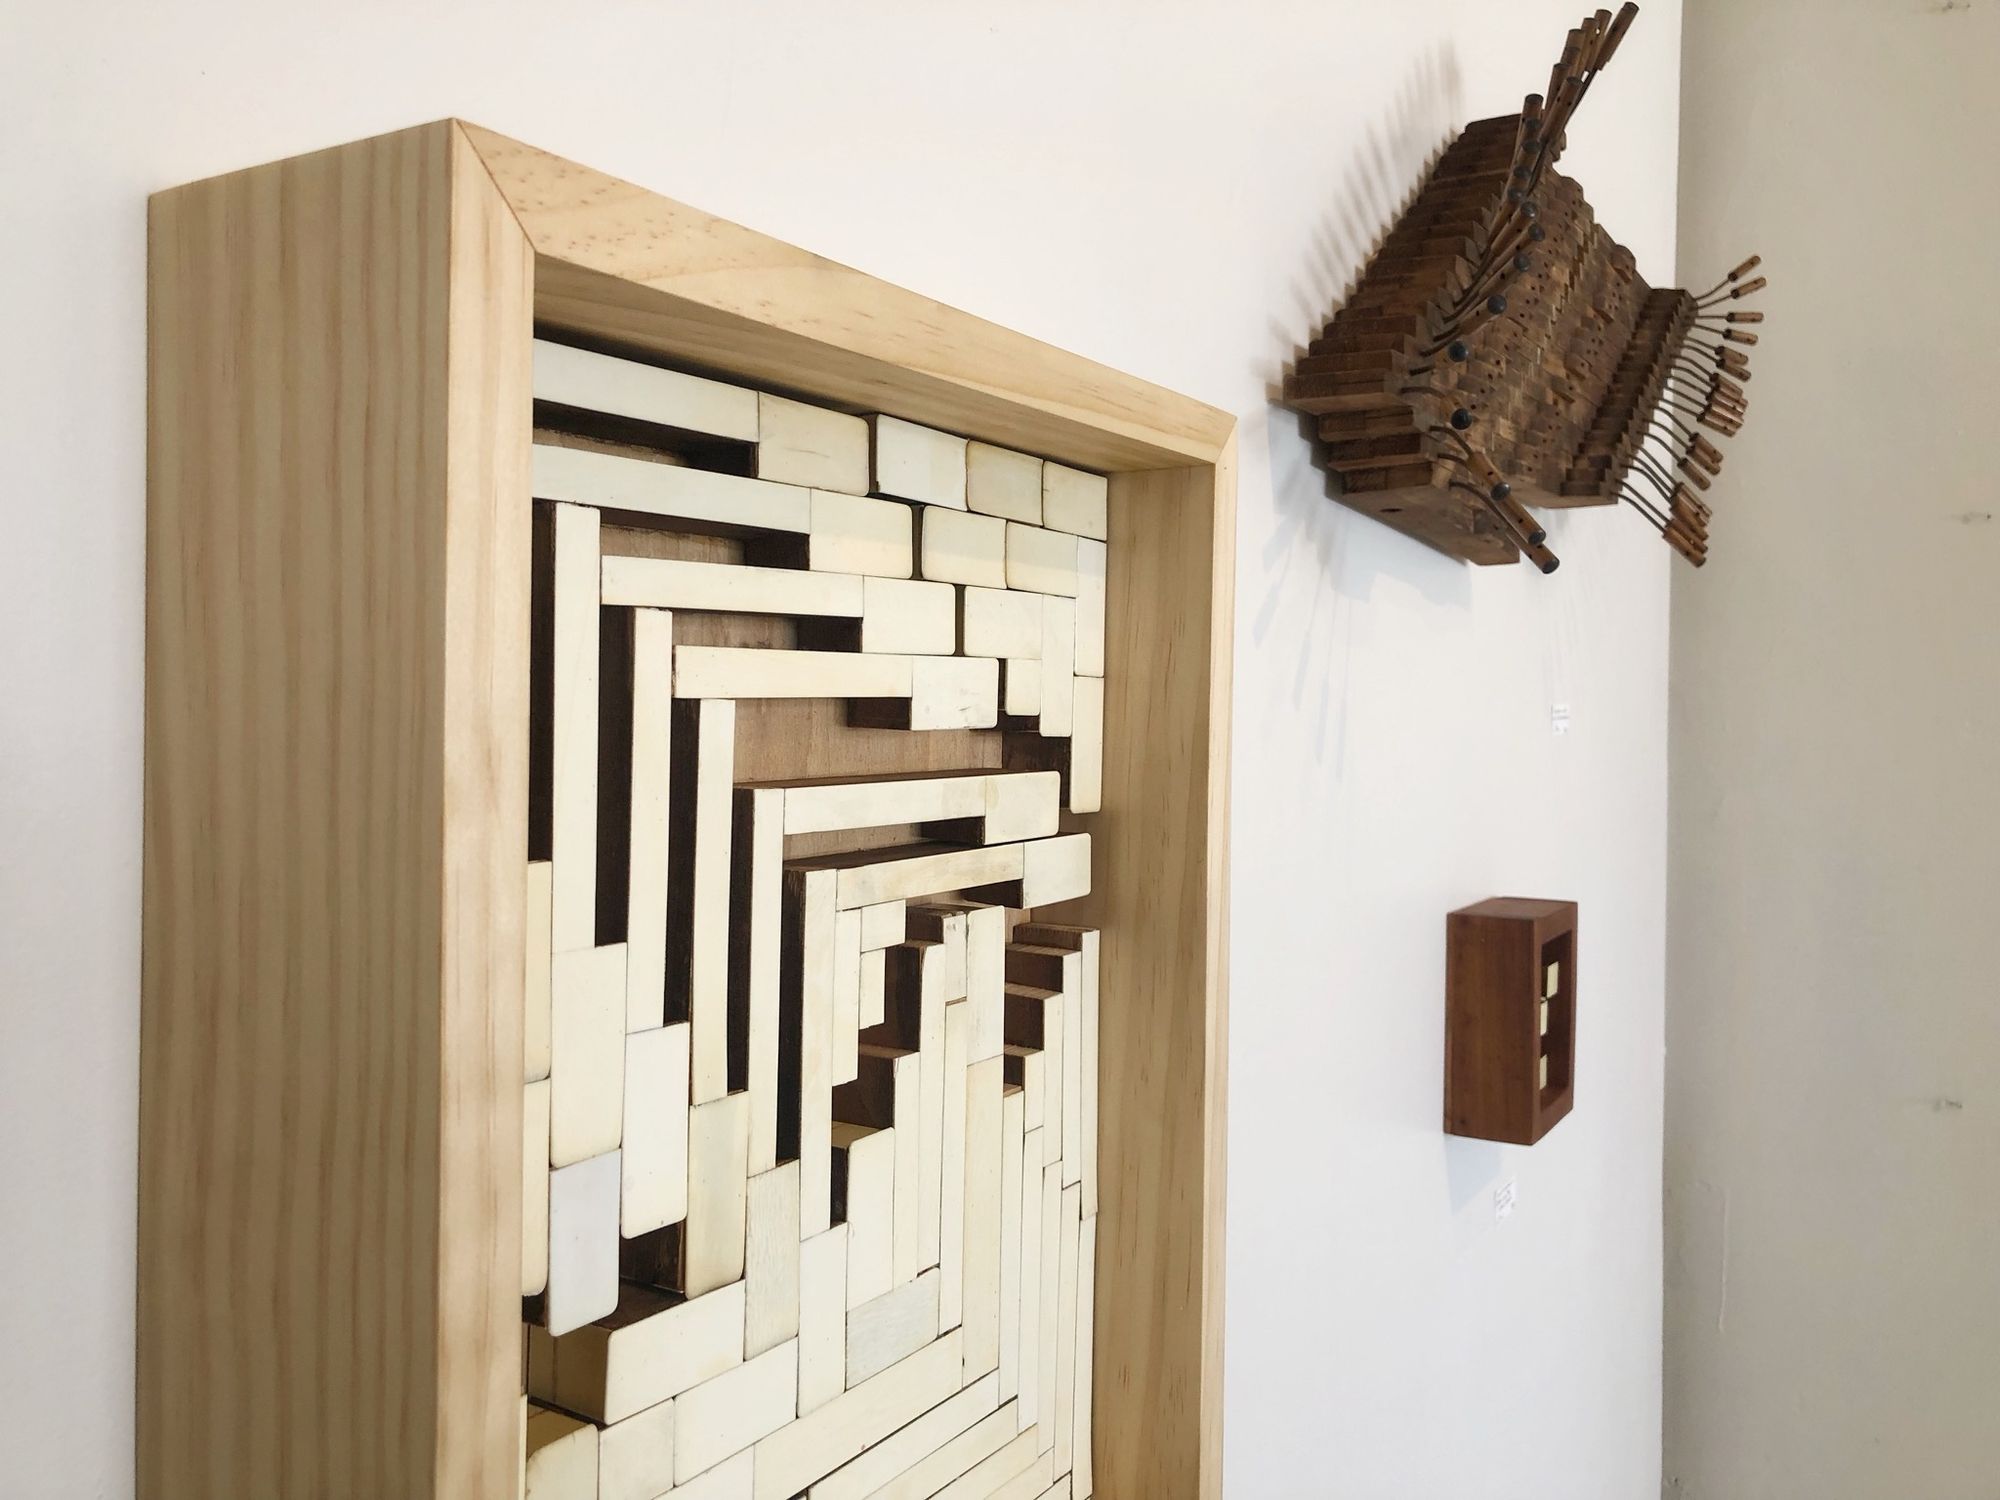 Wall mounted abstract sculpture in light wood frame made from Ivory piano keys